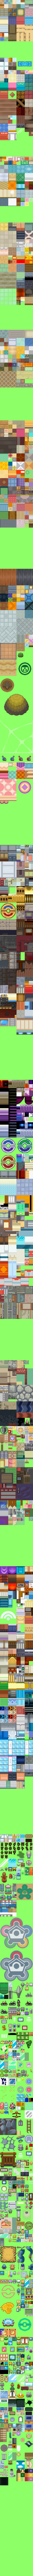 Ripped Tileset Interior HGSS